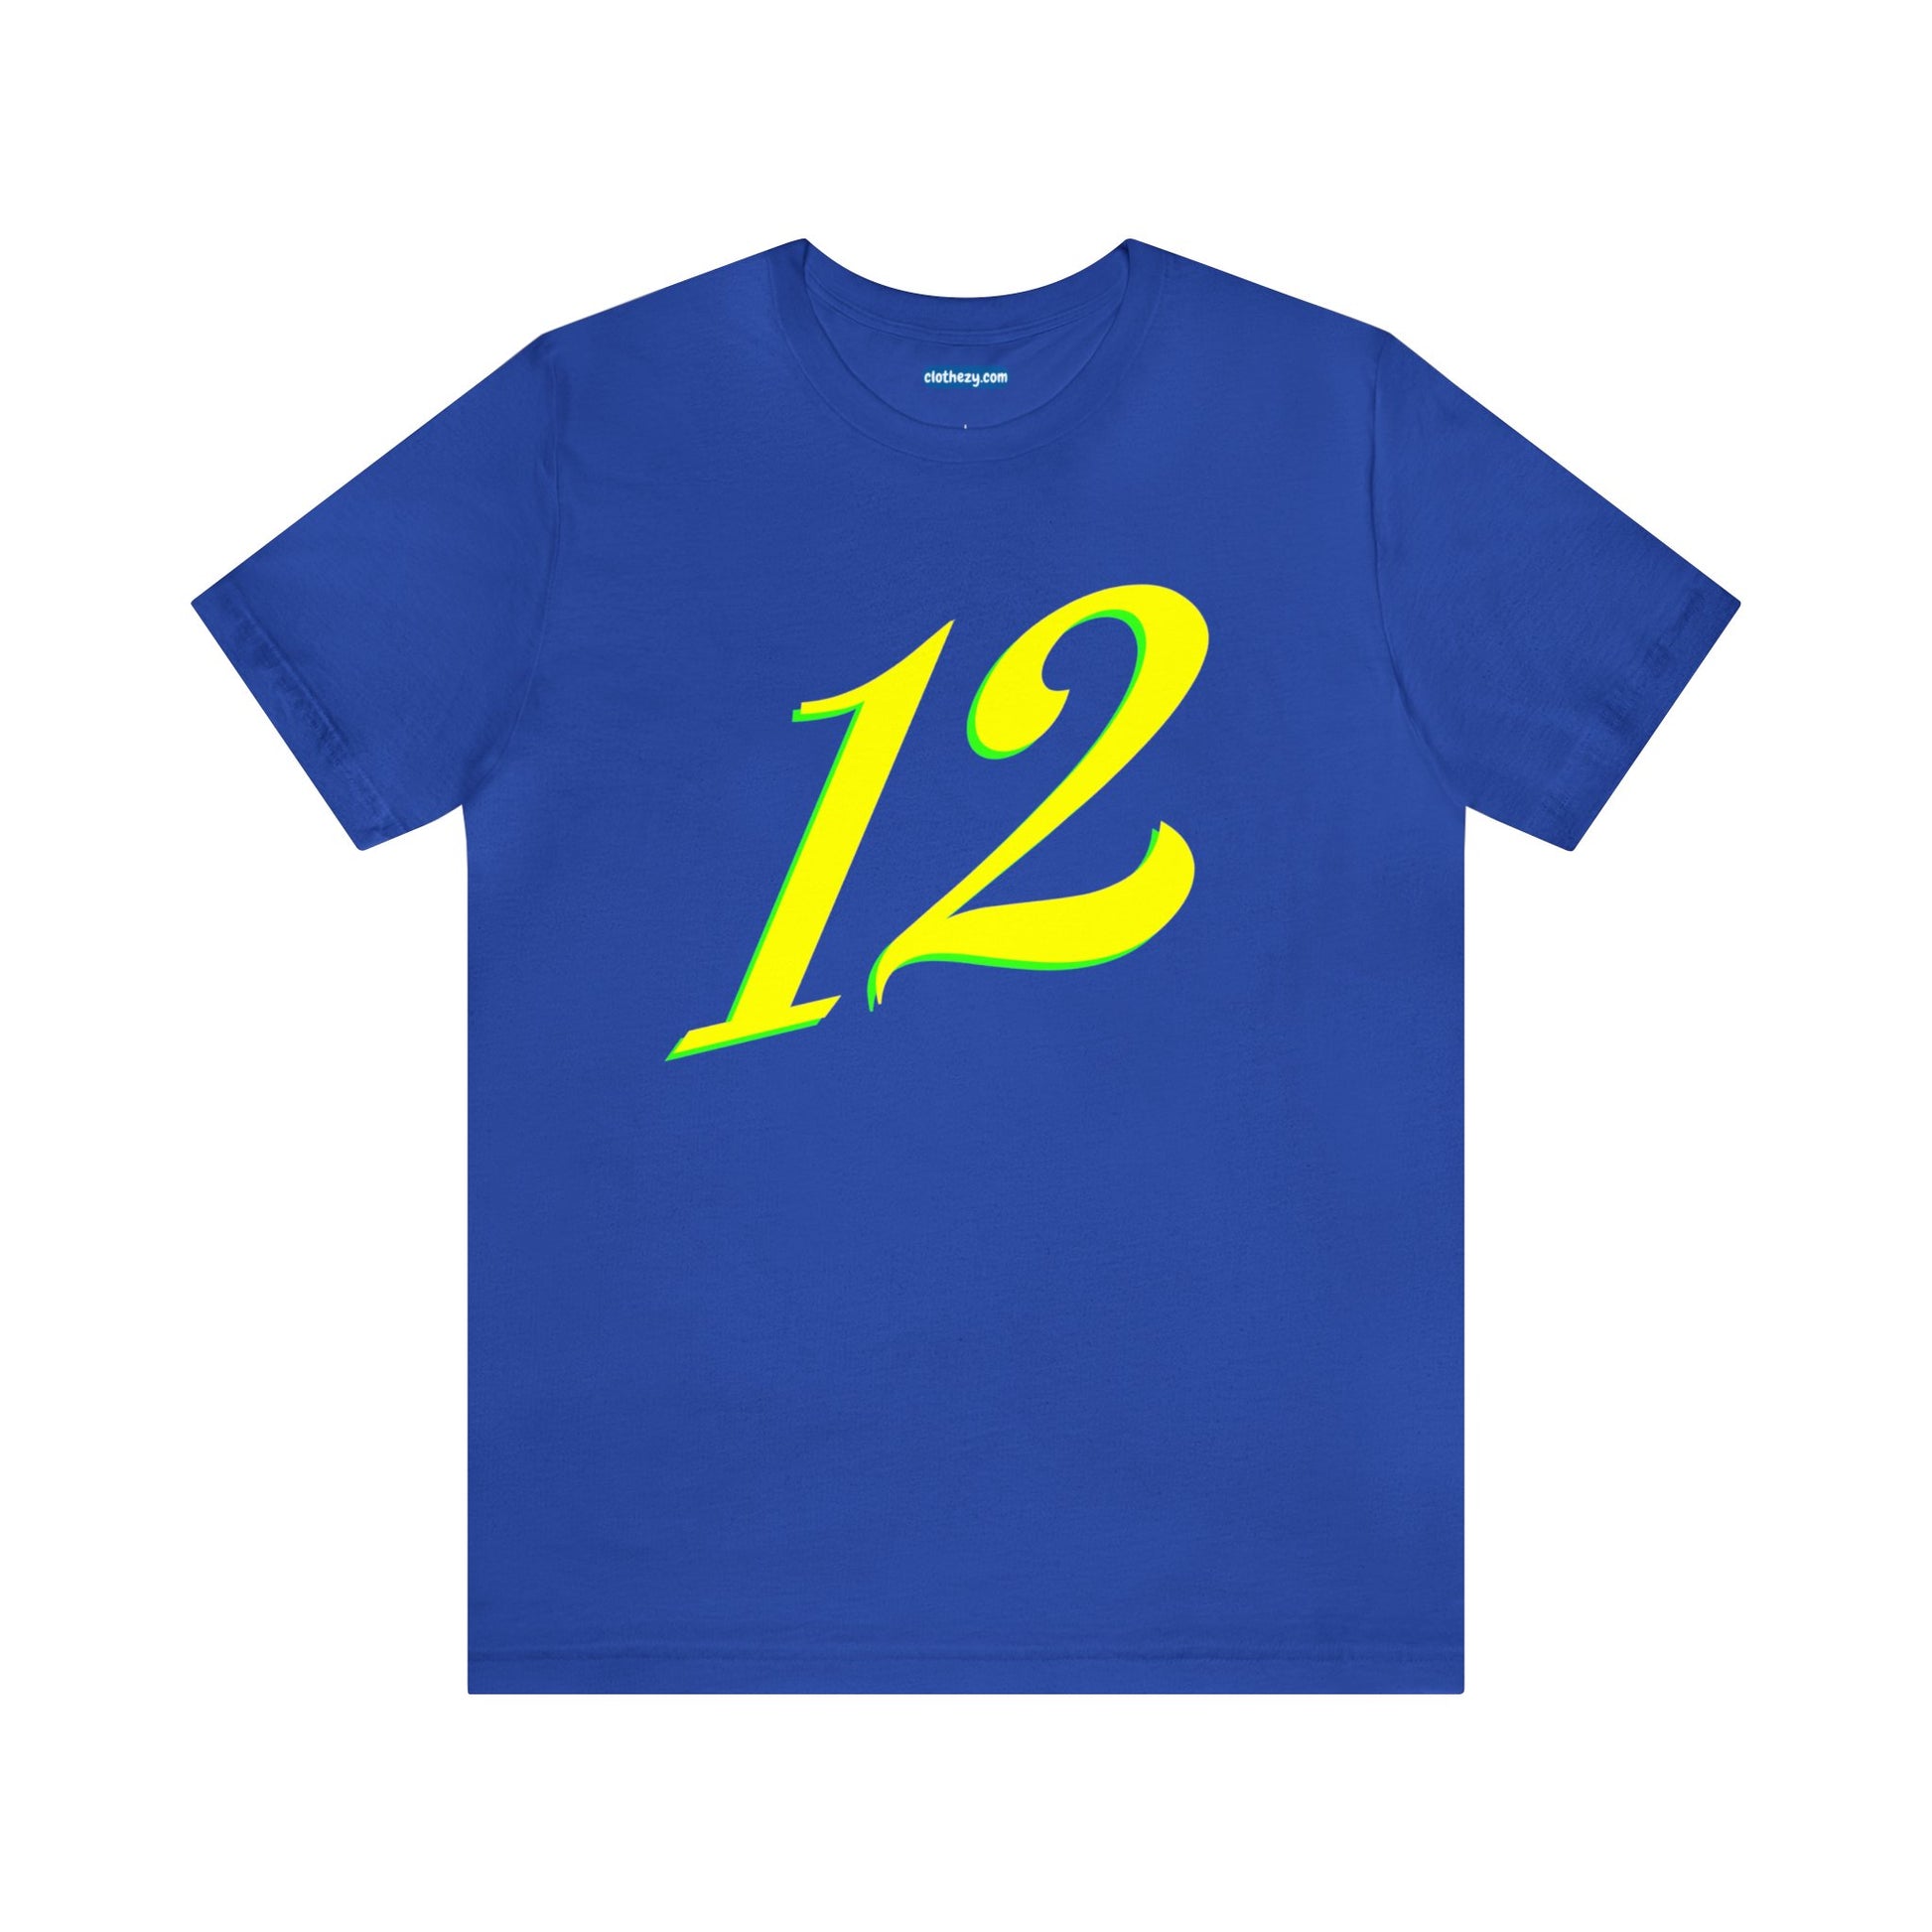 Number 12 Design - Soft Cotton Tee for birthdays and celebrations, Gift for friends and family, Multiple Options by clothezy.com in Royal Blue Size Small - Buy Now